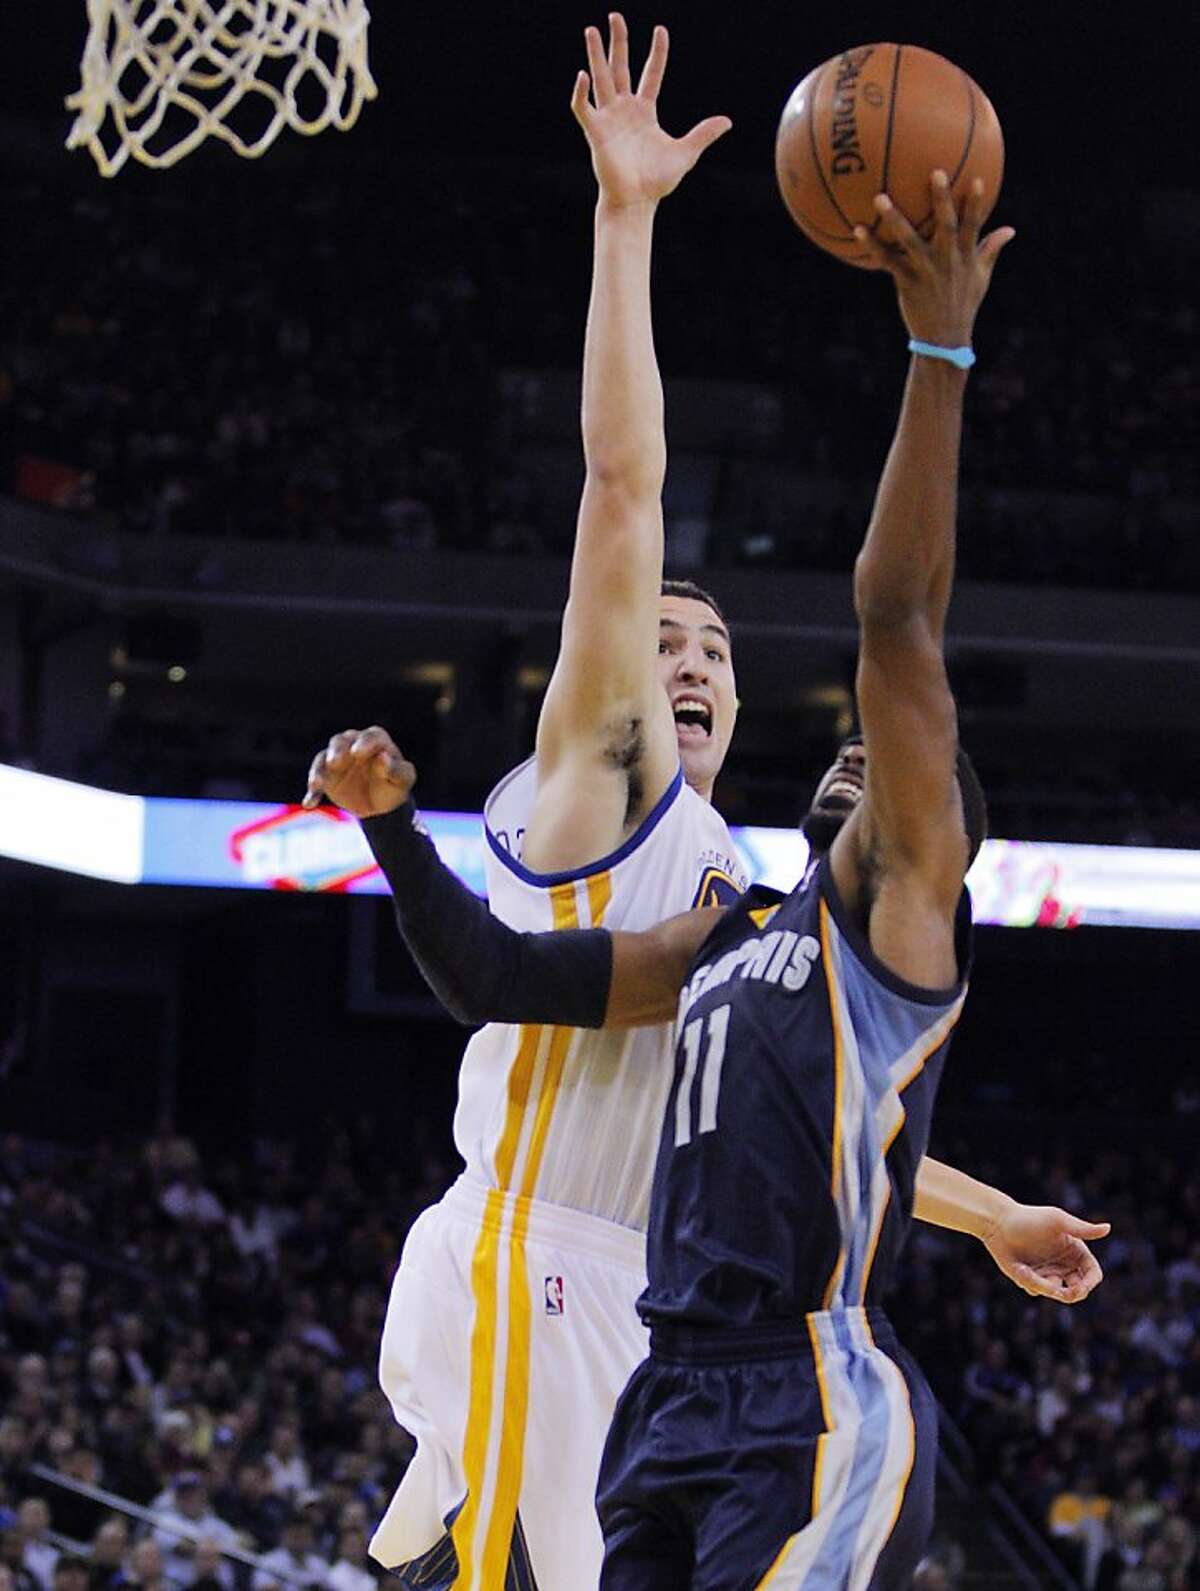 Klay Thompson guards against Mike Conley in the second half. The Golden State Warriors played the Memphis Grizzlies at Oracle Arena in Oakland, Calif., on Wednesday, November 20, 2013. The Grizzlies won 88-81 in overtime.